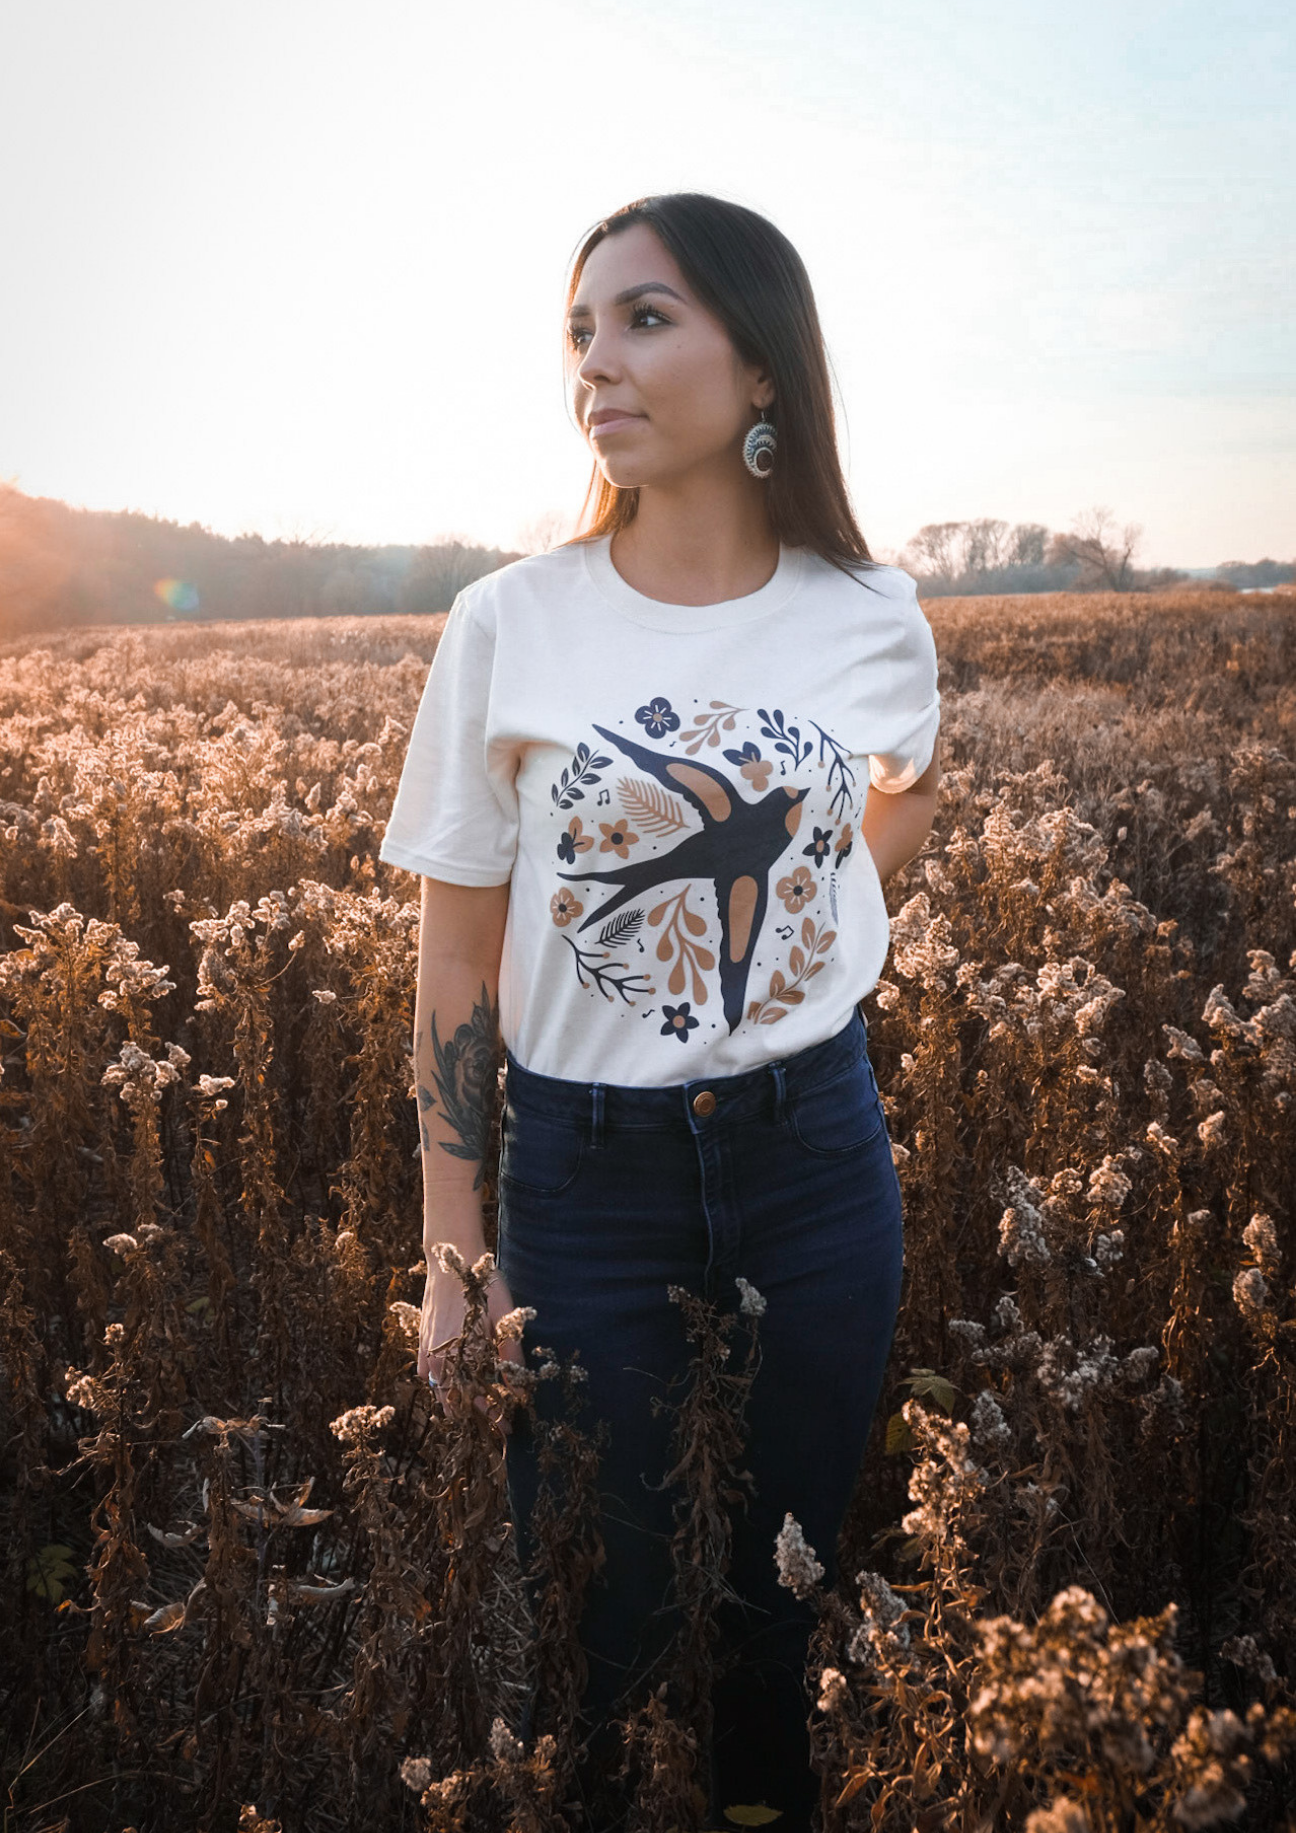 A girl wearing a white shirt with a bird pattern standing outside in the bushes